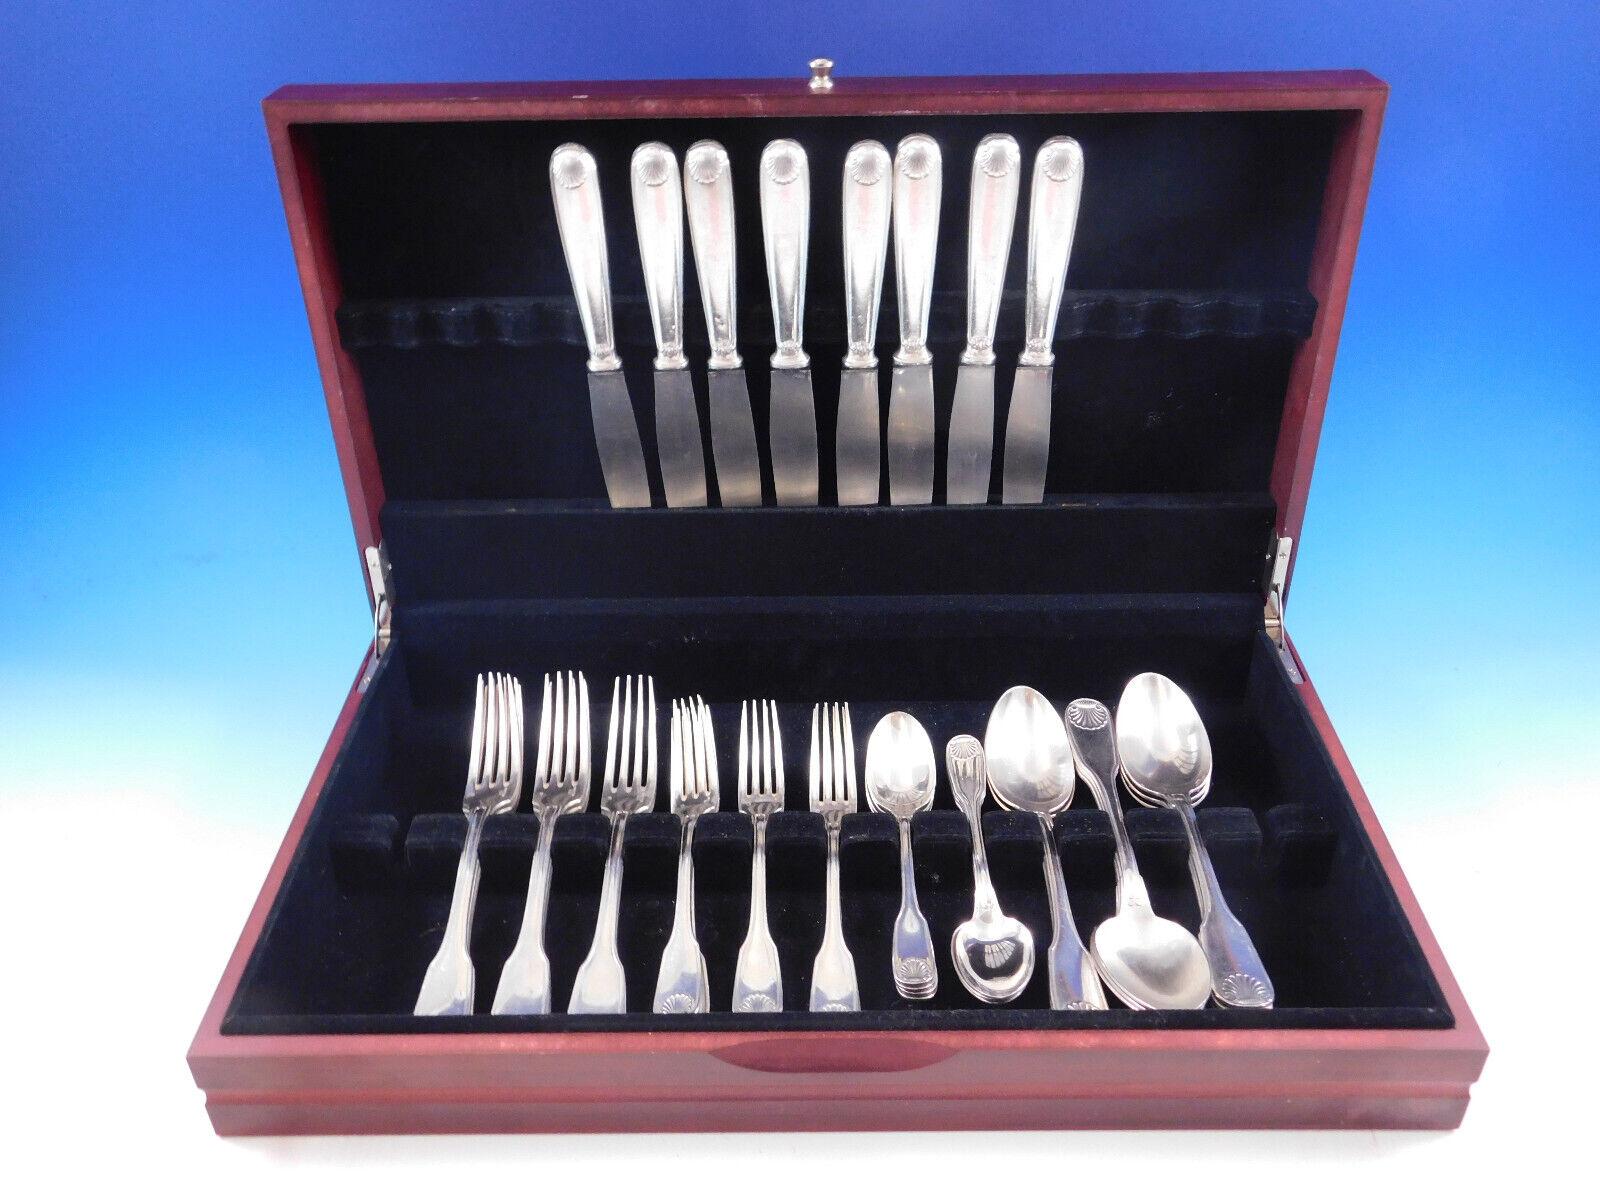 Vendome Arcantia by Christofle France Silverplated flatware set, 40 pieces. This pattern features the same shell motif that adorned the ceremonial silverware used during the reign of King Louis XIV. This set includes:

8 dinner knives, 9 3/4